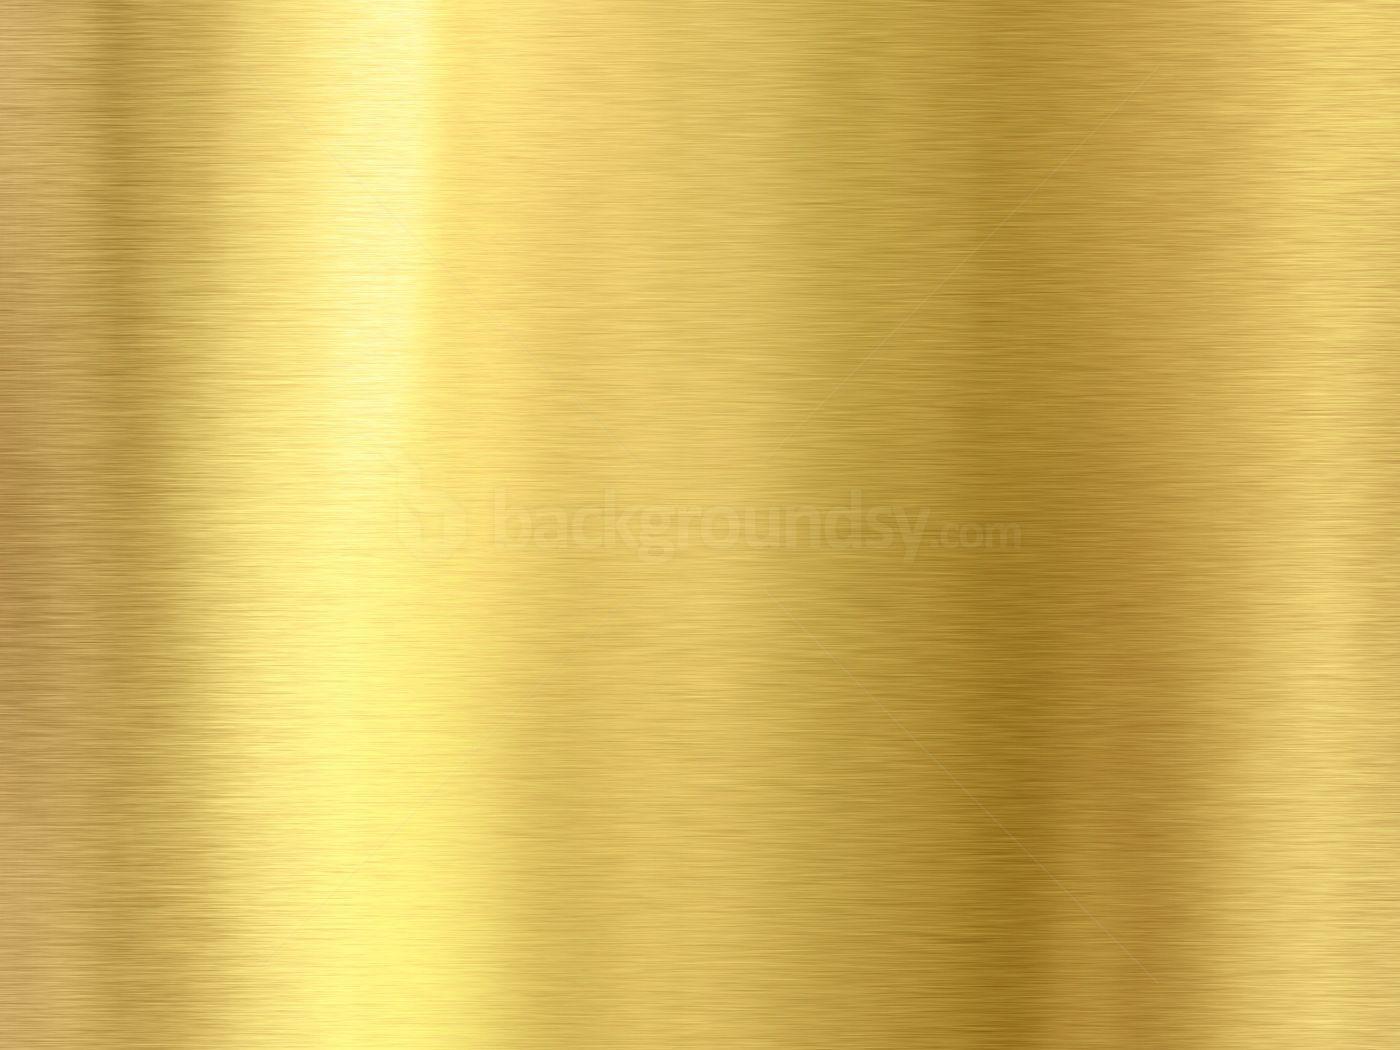 Gold backgrounds